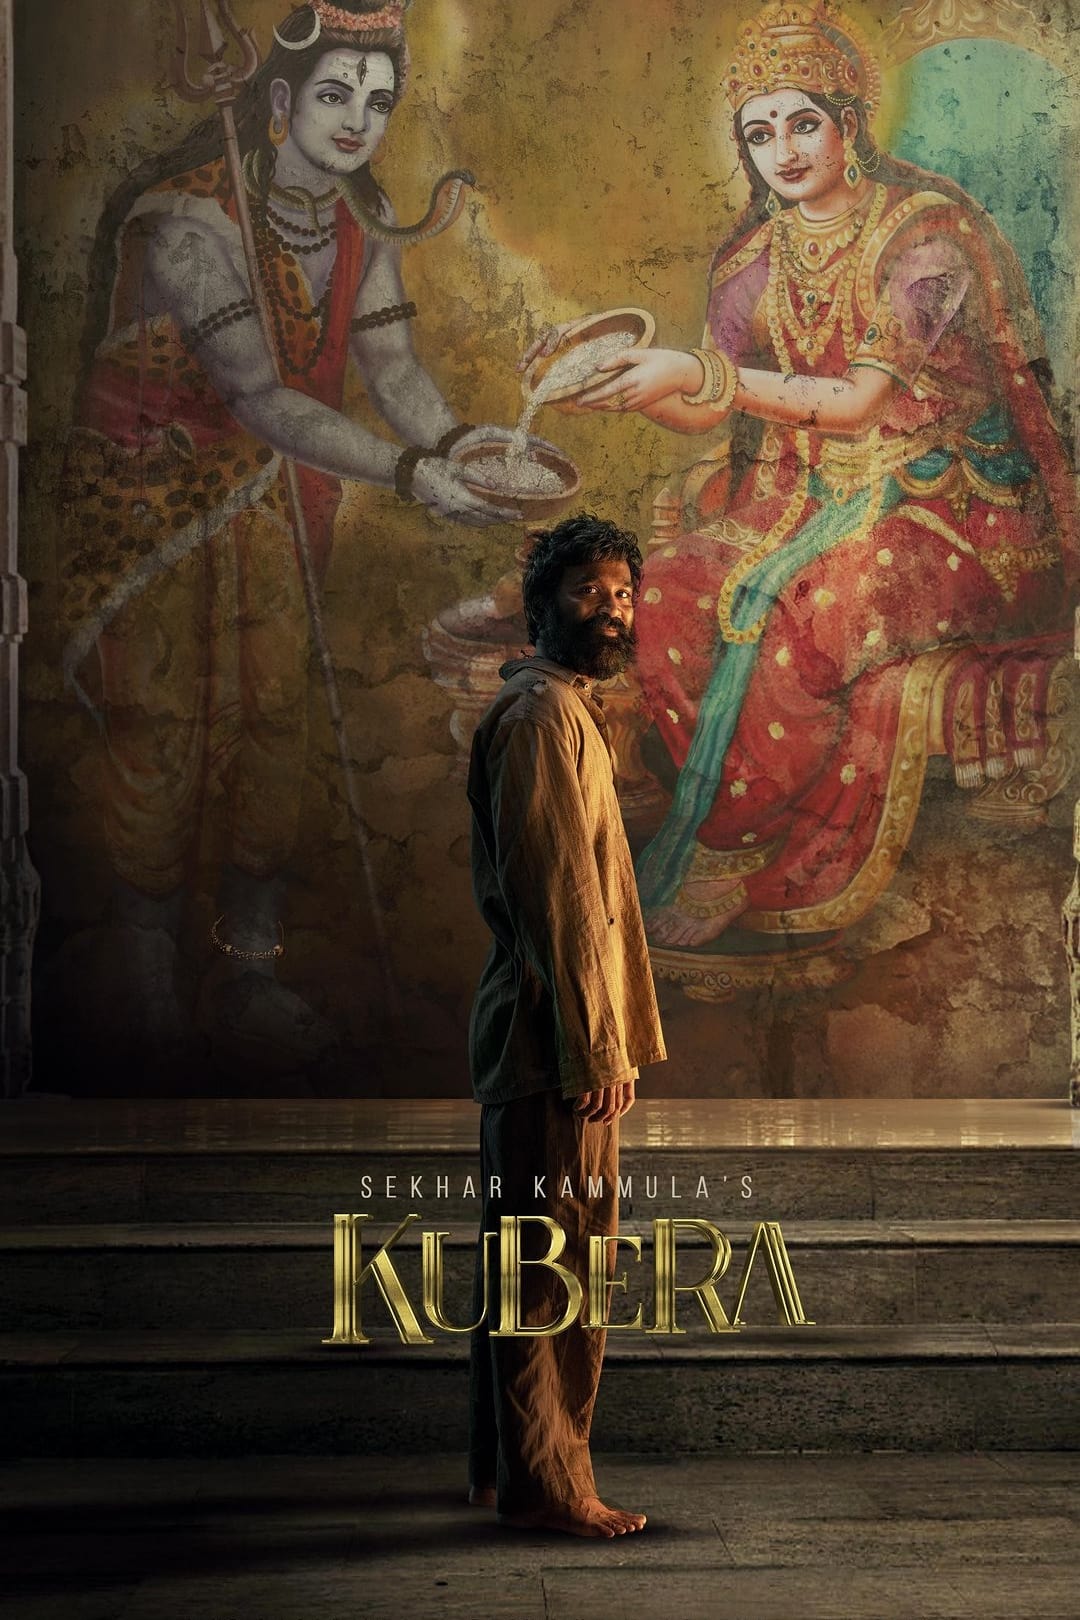 Poster for the movie "Kubera"